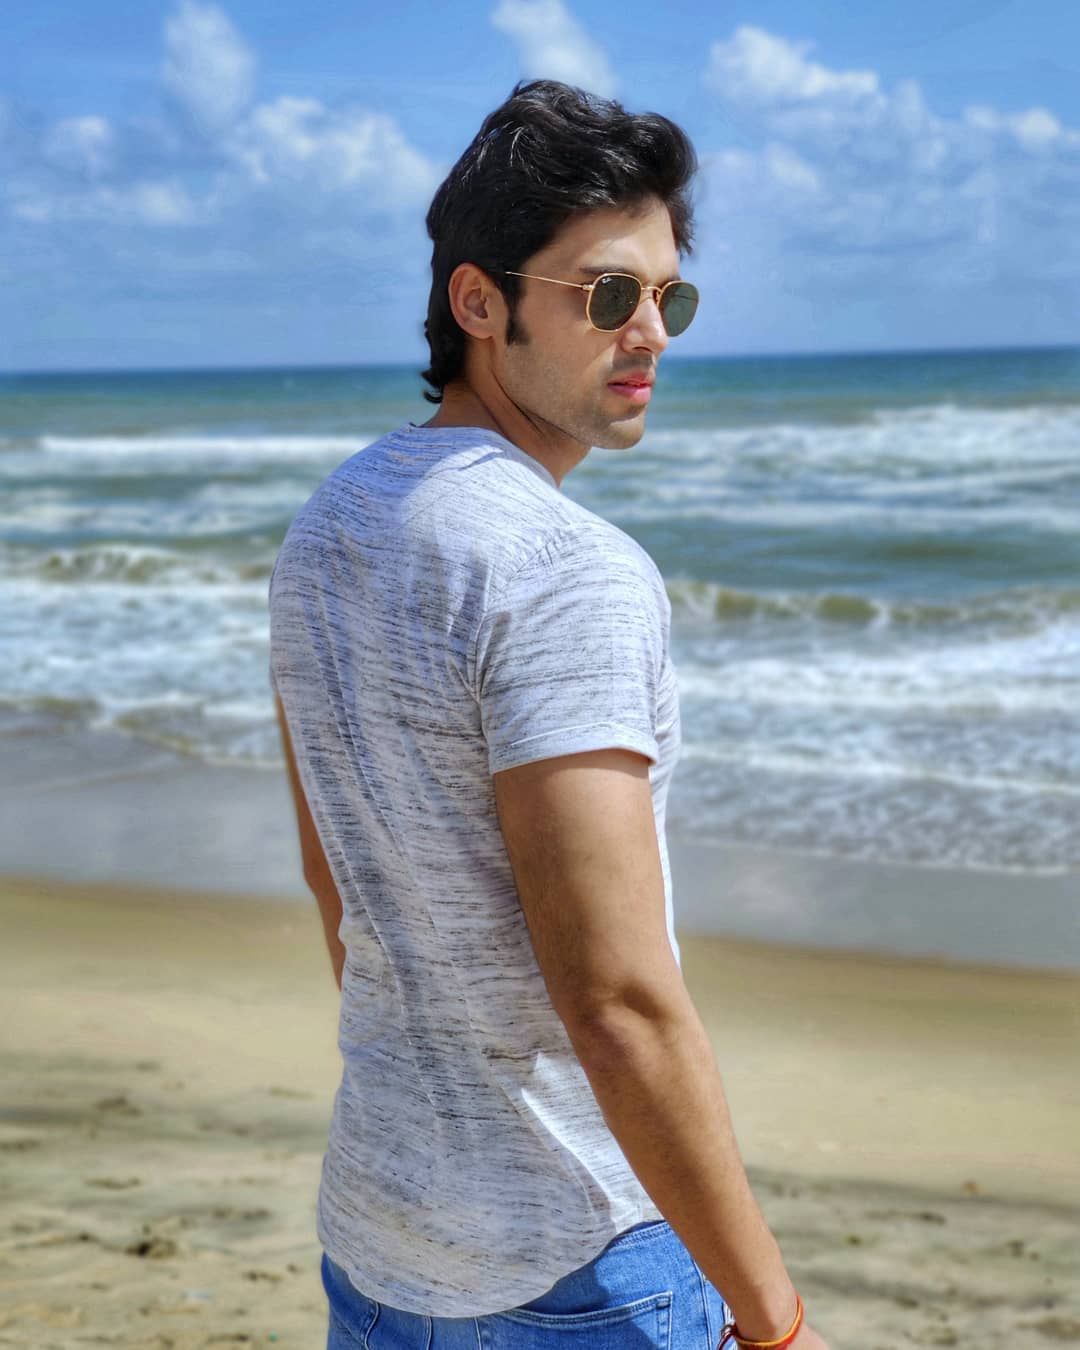 Parth Samthaan Is All Set To Make His Bollywood Debut This Year, Read Details